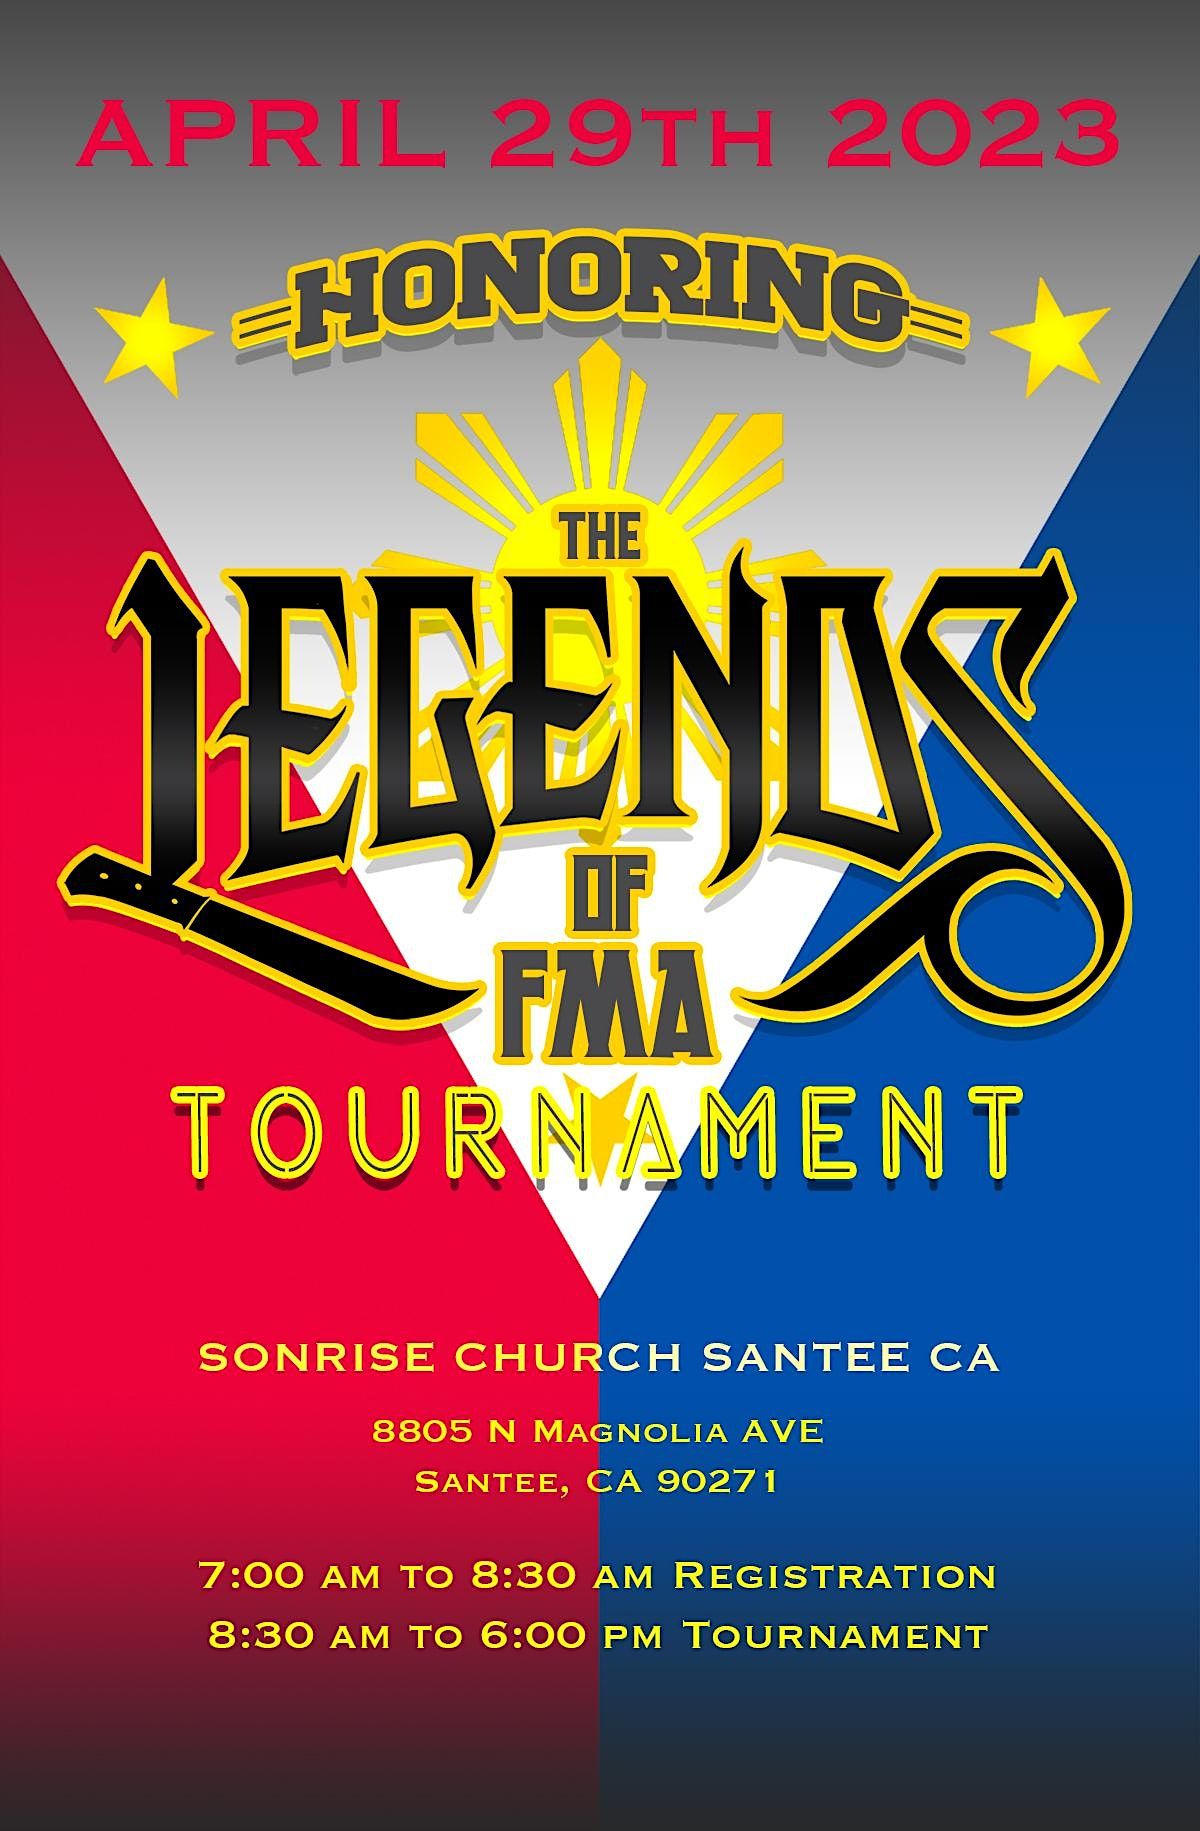 3rd Annual Honoring the Legends of FMA Tournament